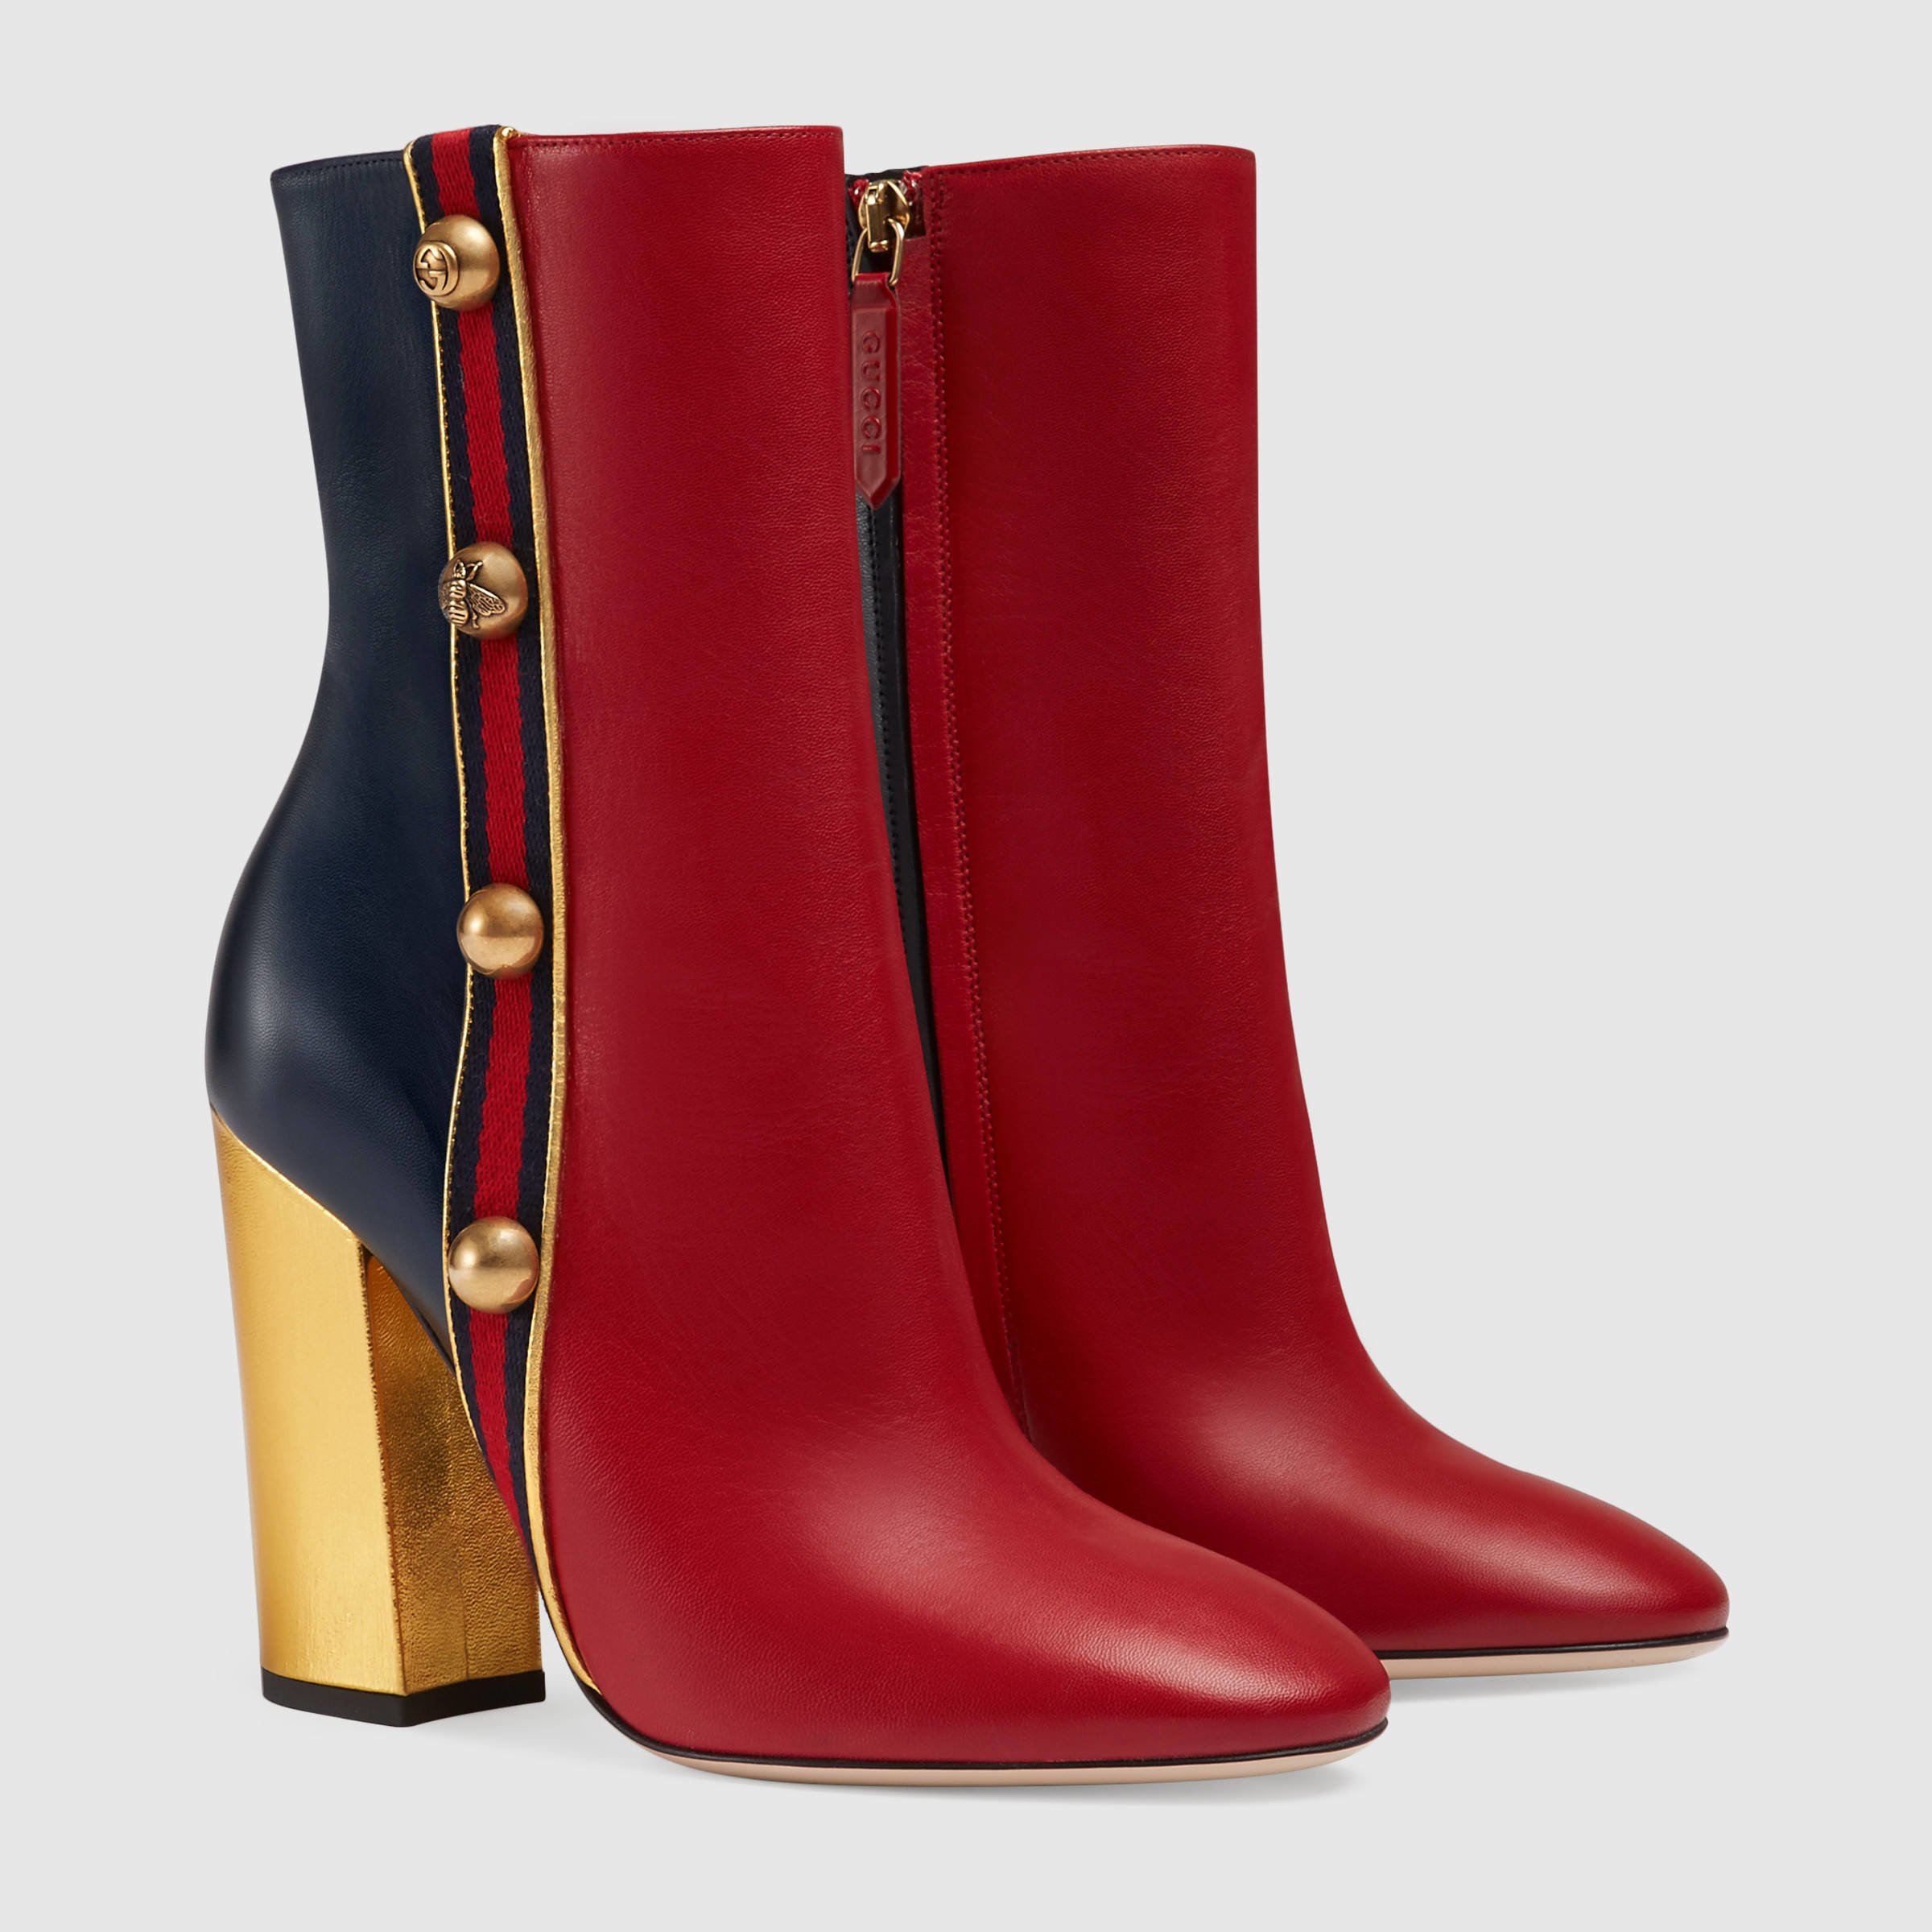 Gucci Carly Leather Ankle Boots in Red Lyst